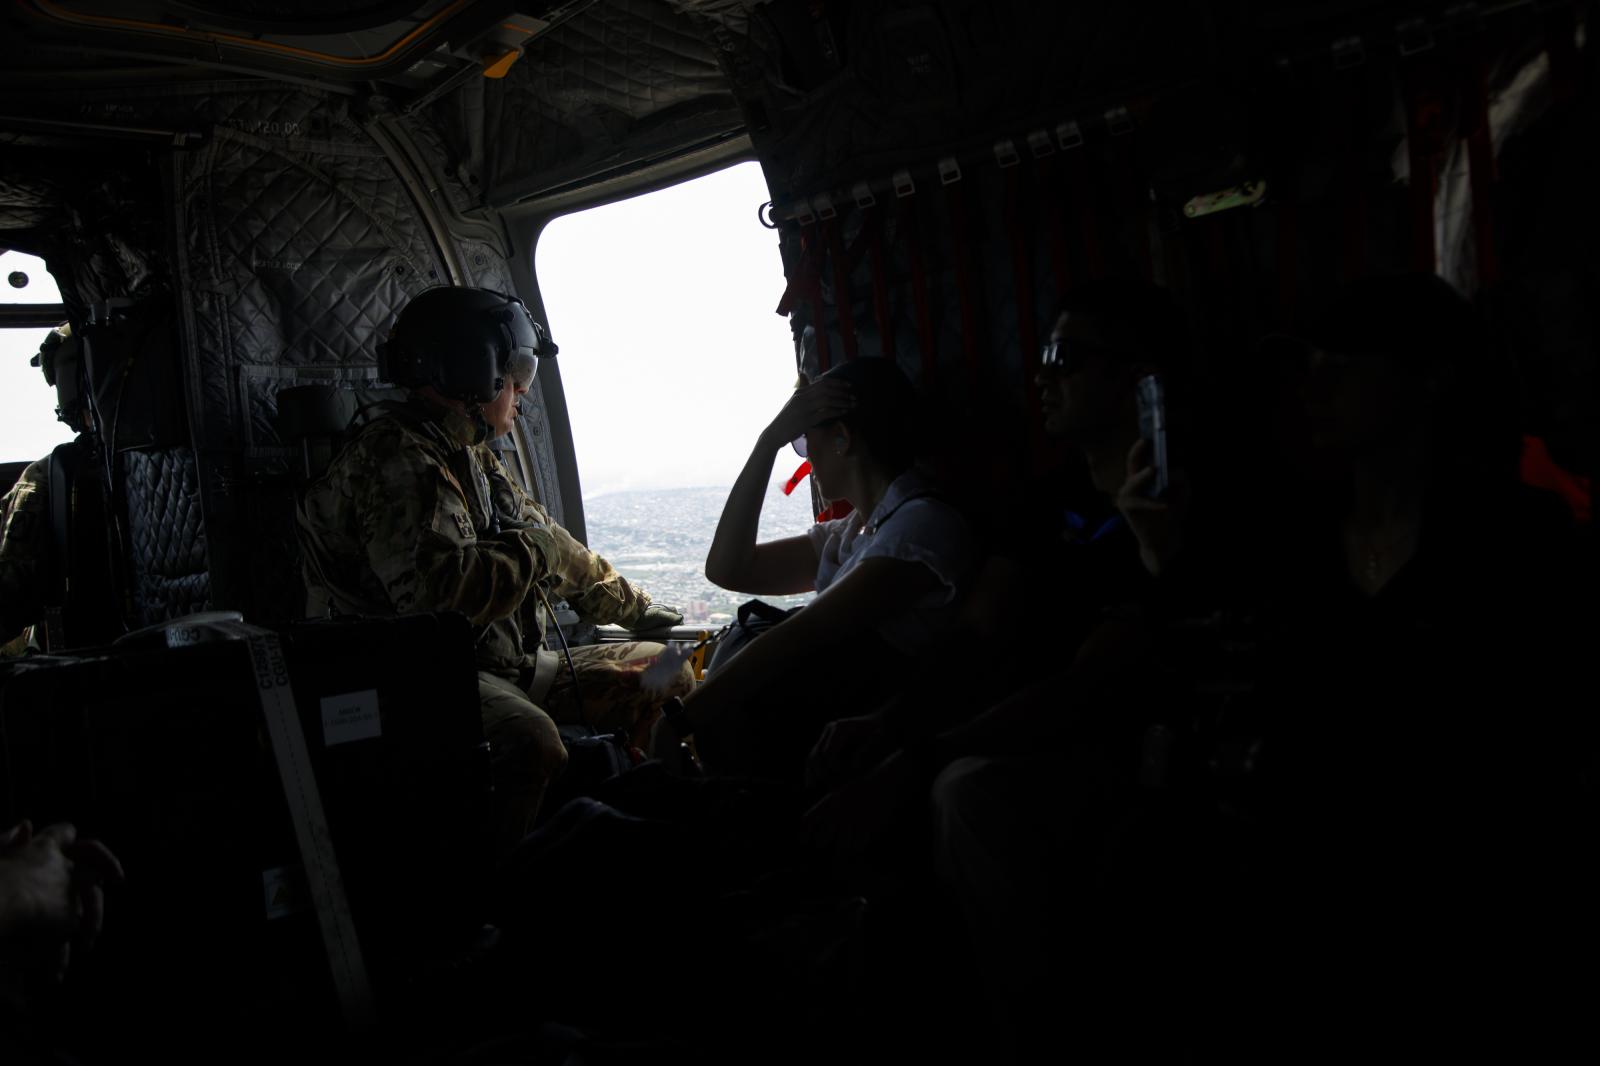 U.S. Vice President Kamala Harris Visit To Ghana - A military man in a helicopter en route to Cape Coast in...